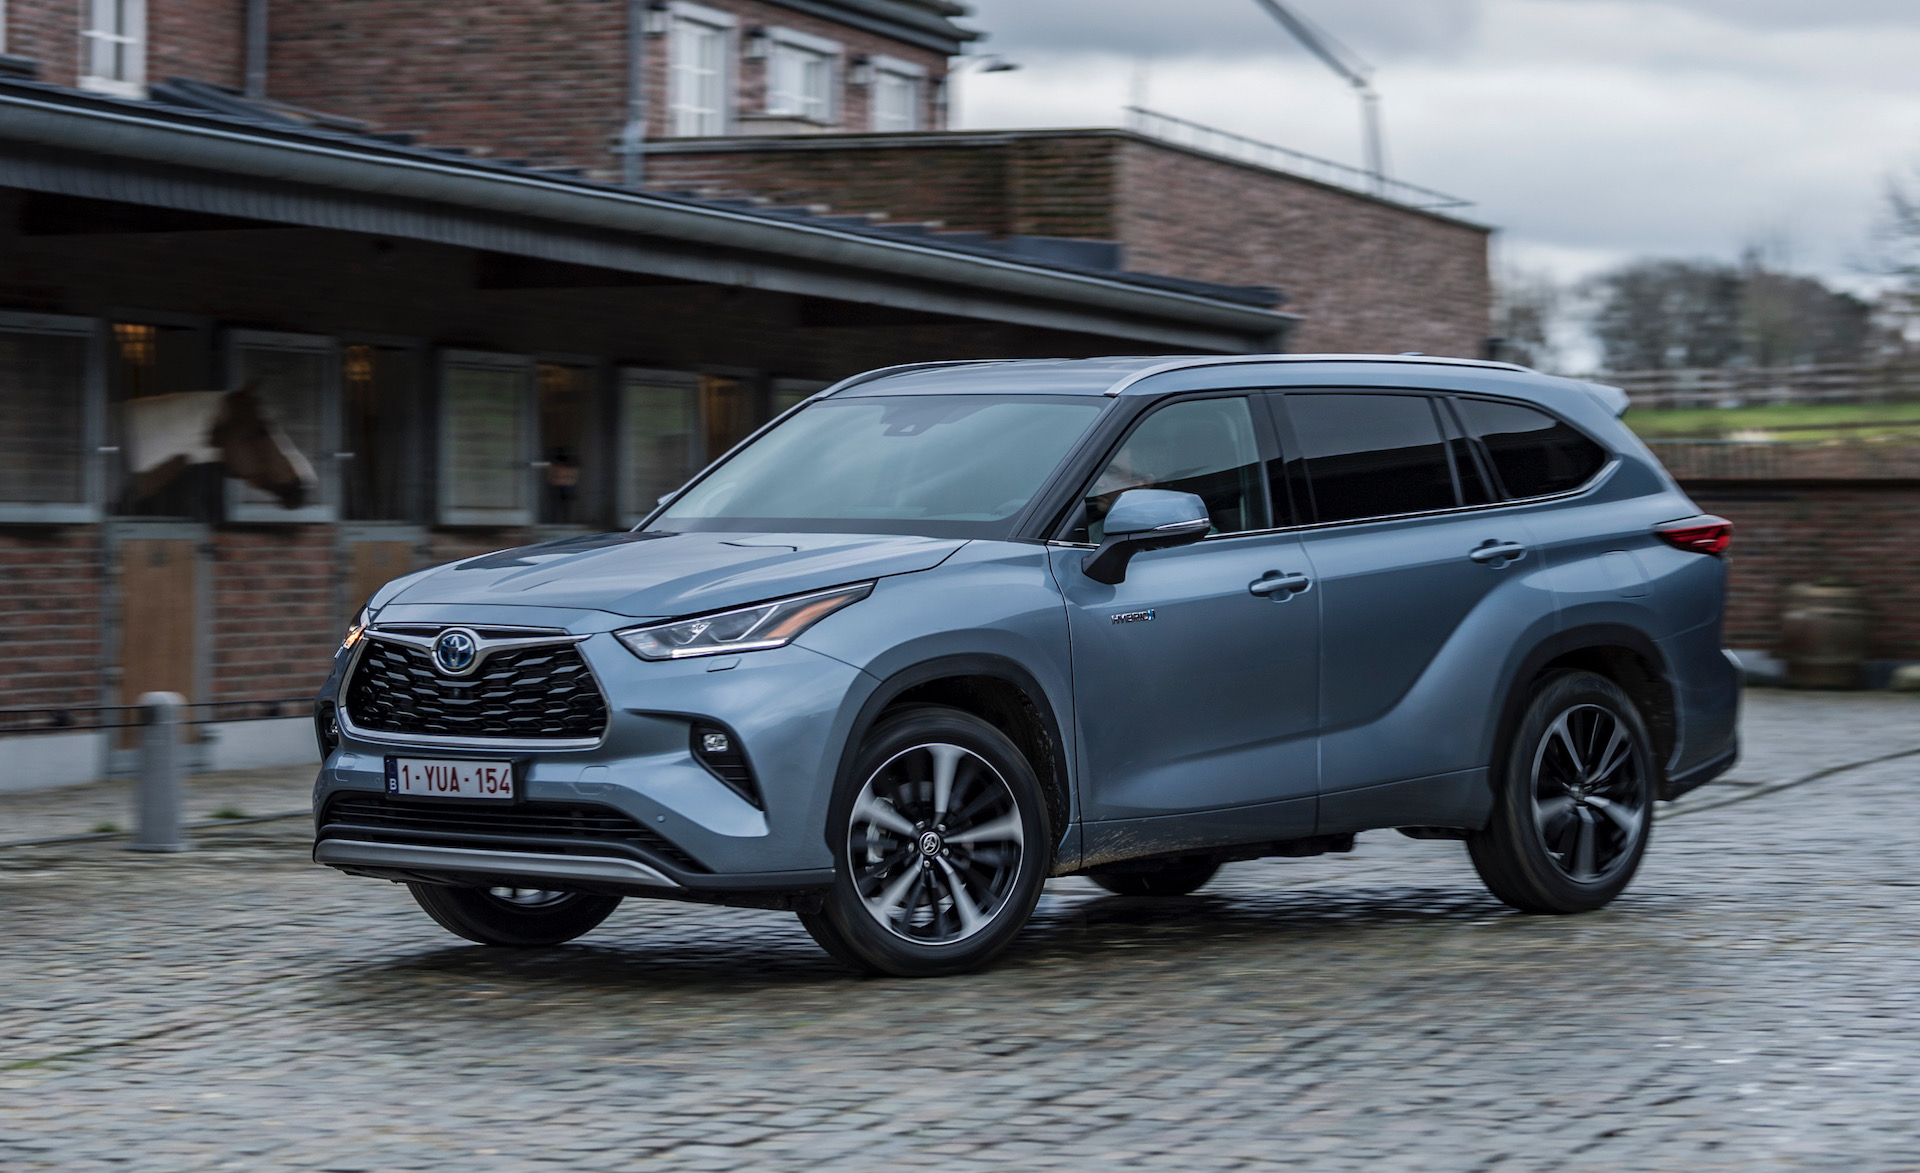 All-new 2021 Toyota Kluger on sale in Australia in June